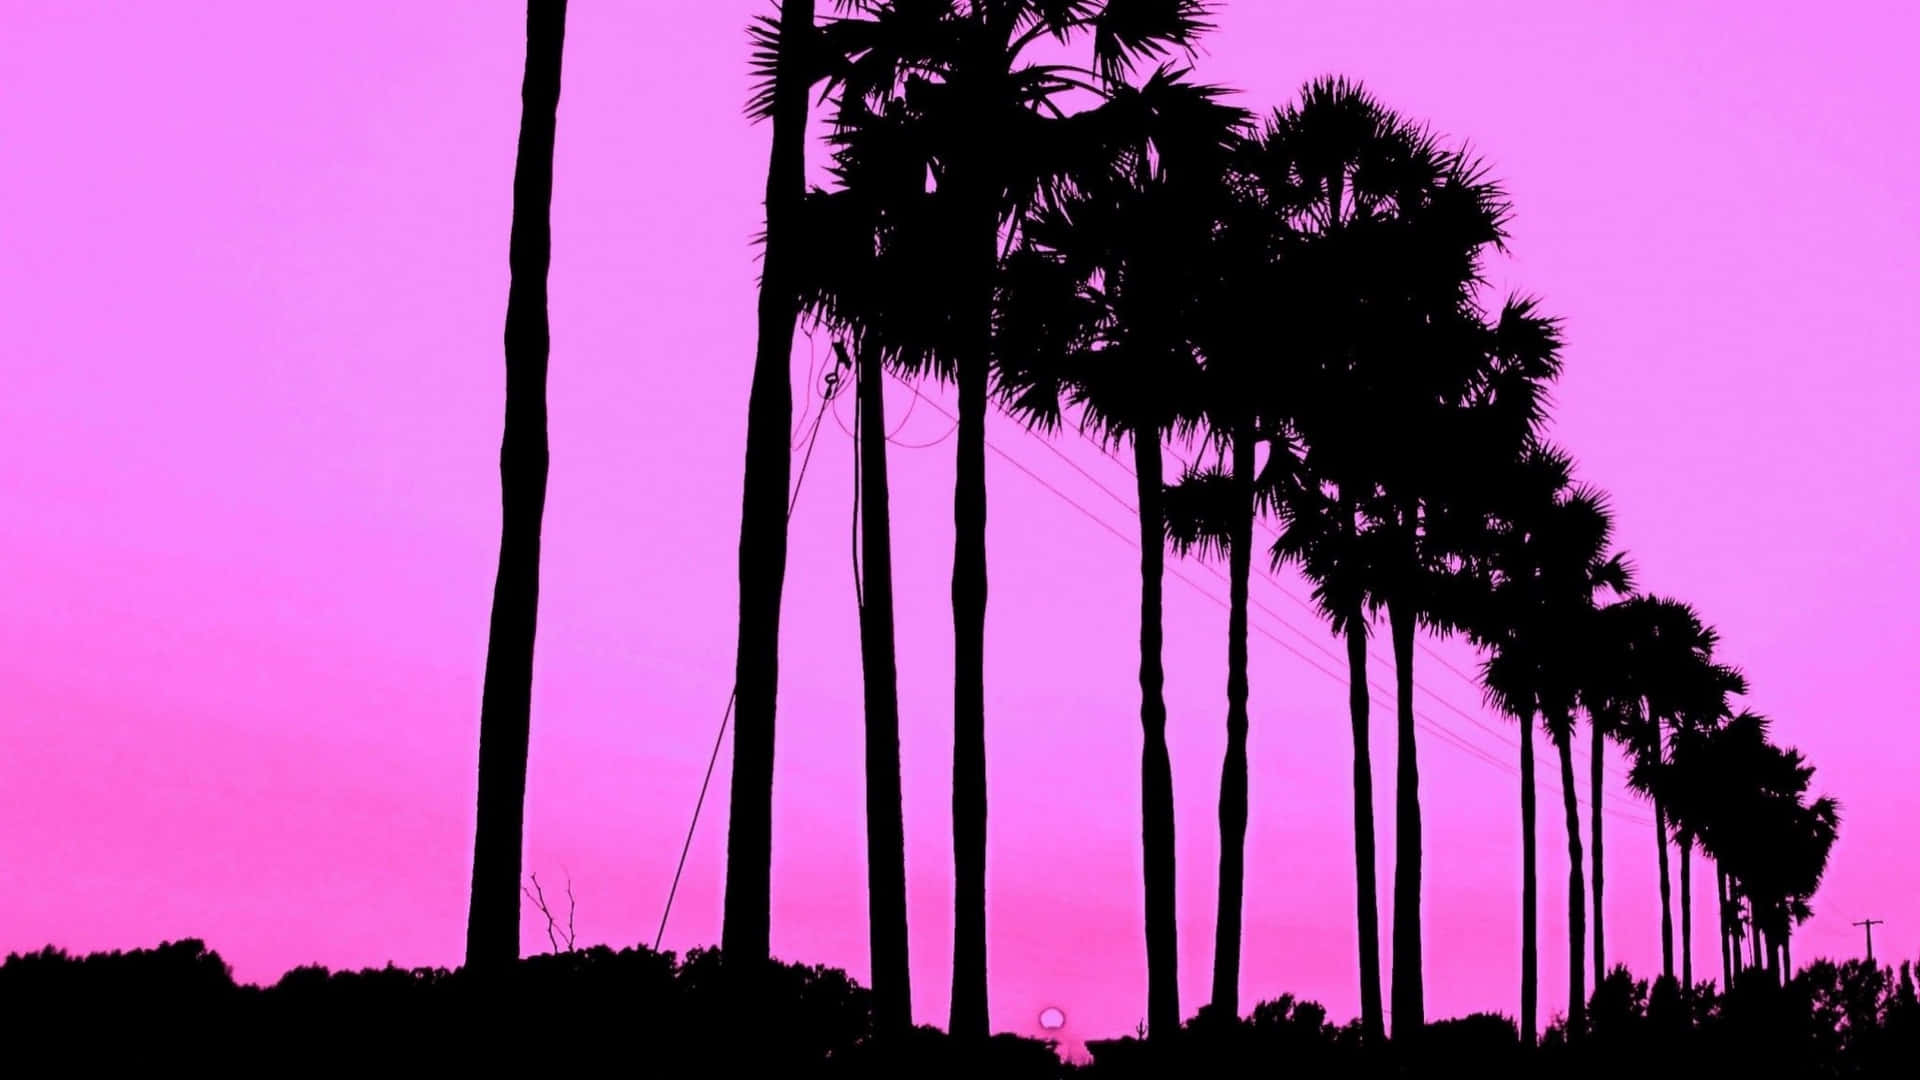 2048x1152 Aesthetic Trees Silhouette In Pink Sky Wallpaper